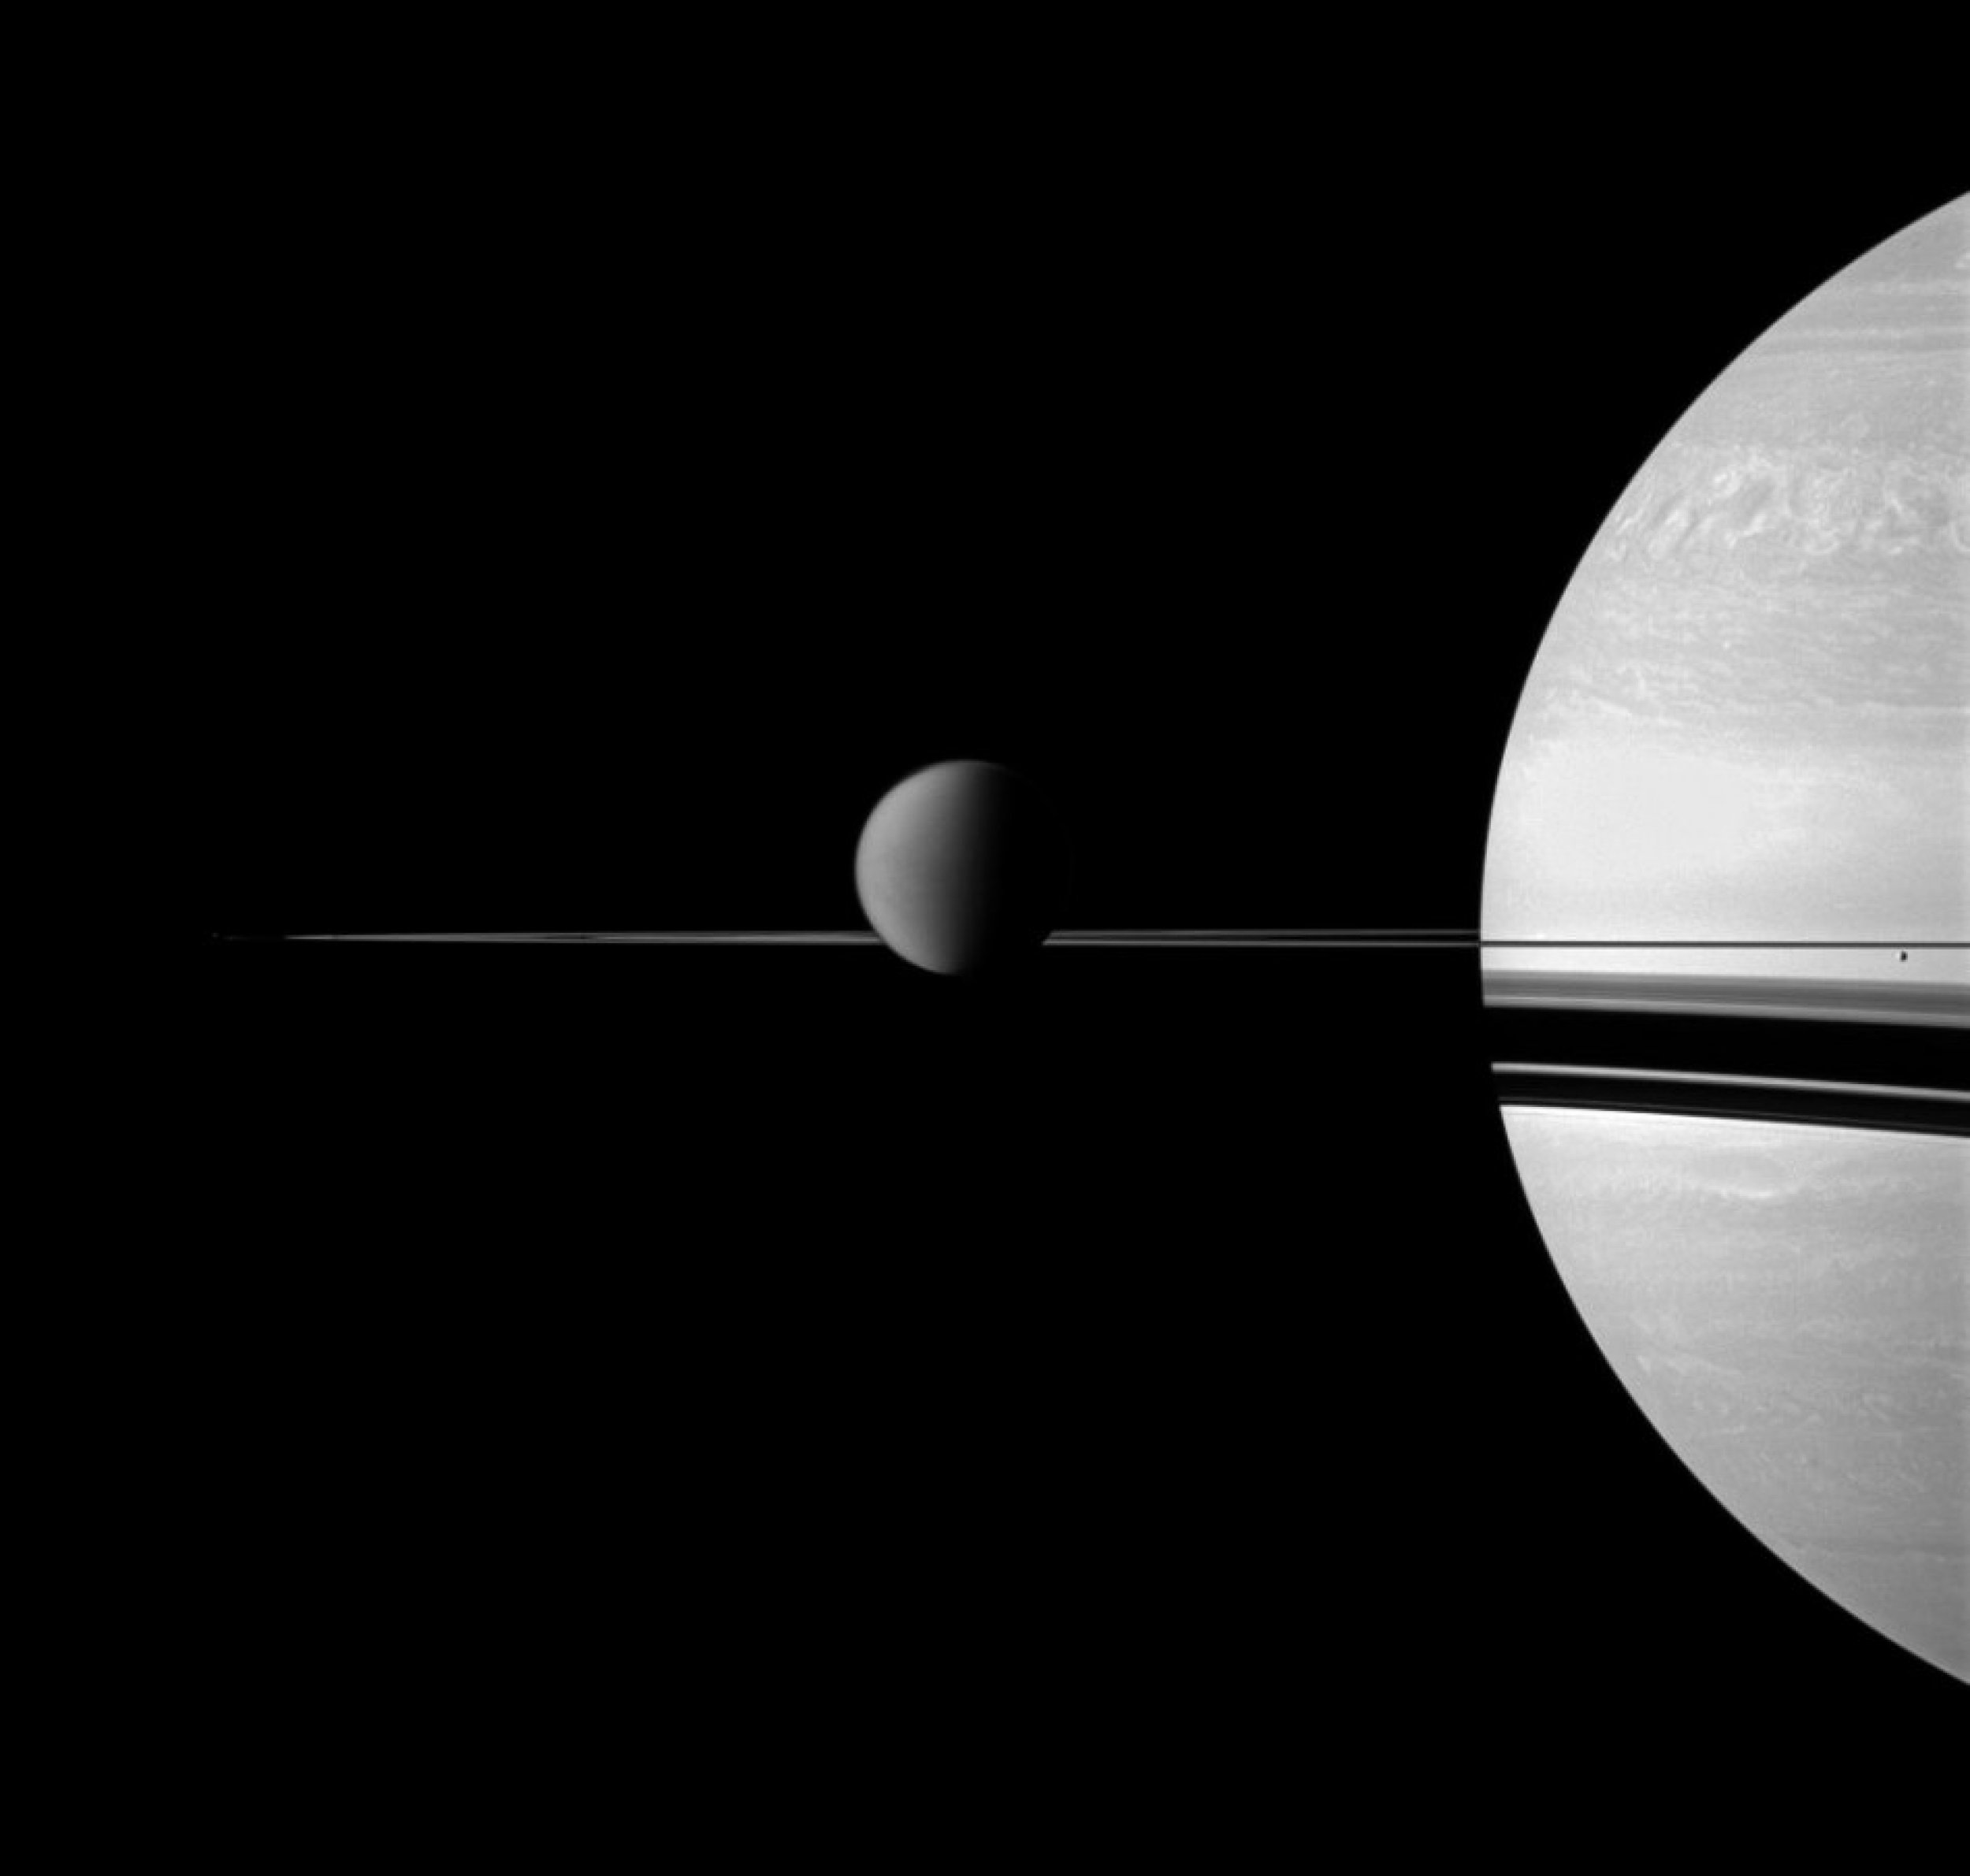 Rain from Enceladus supplies Saturns upper atmosphere with water